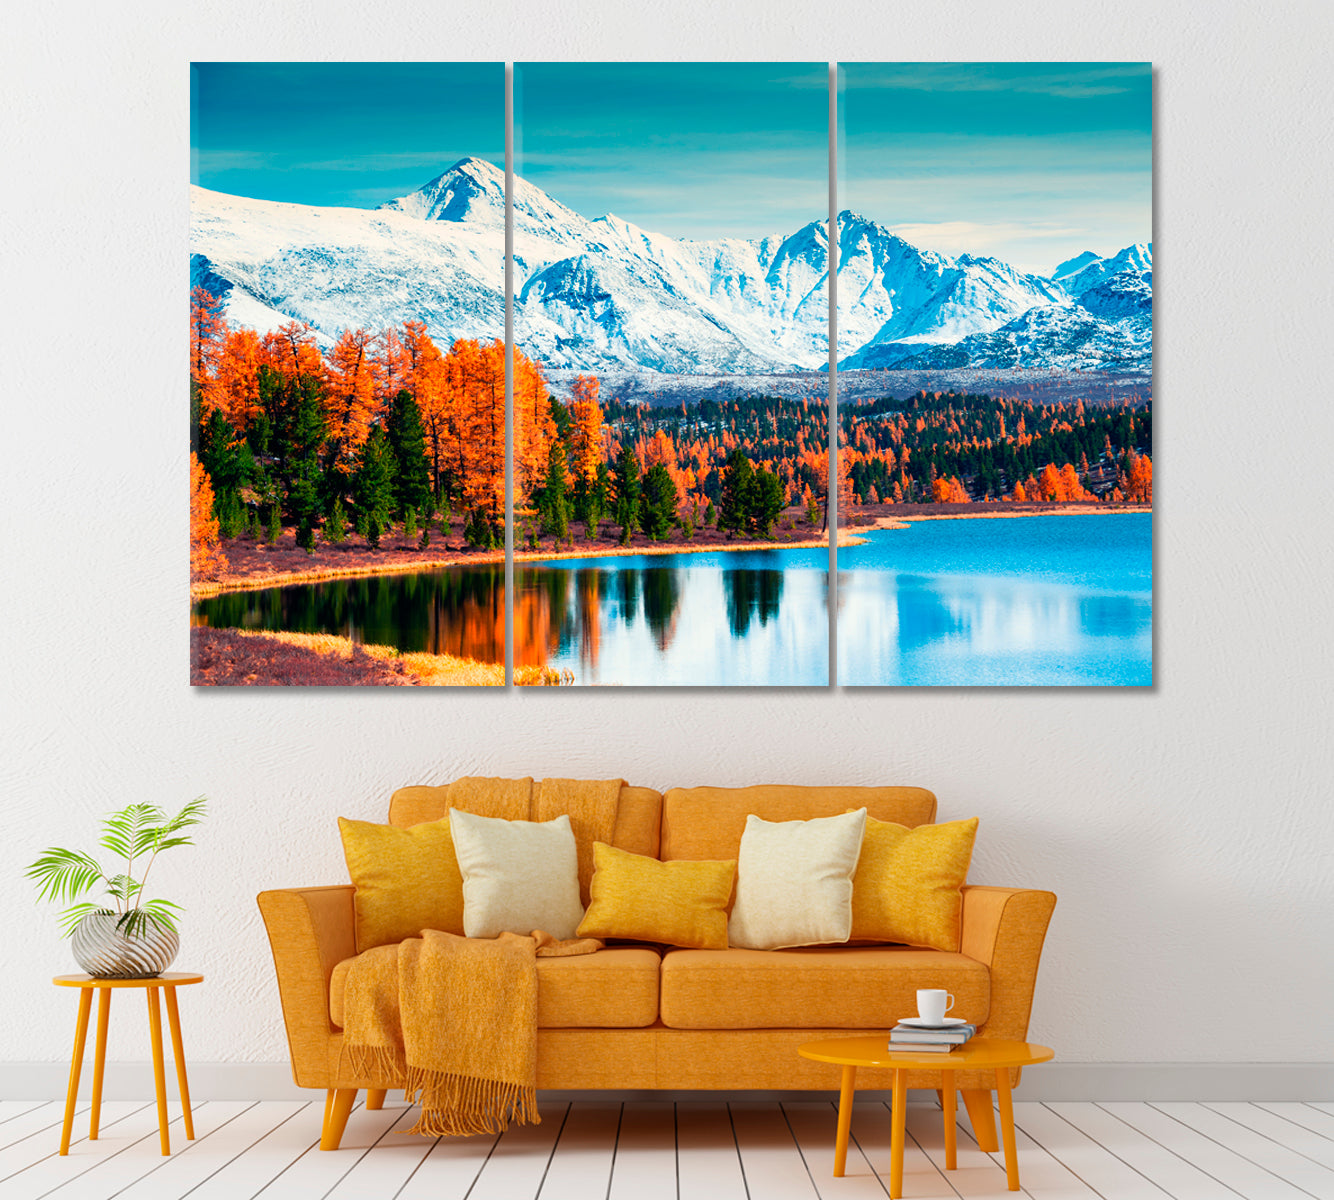 Mountains with Autumn Forest on Kidelu Lake Siberia Russia Canvas Print ArtLexy 3 Panels 36"x24" inches 